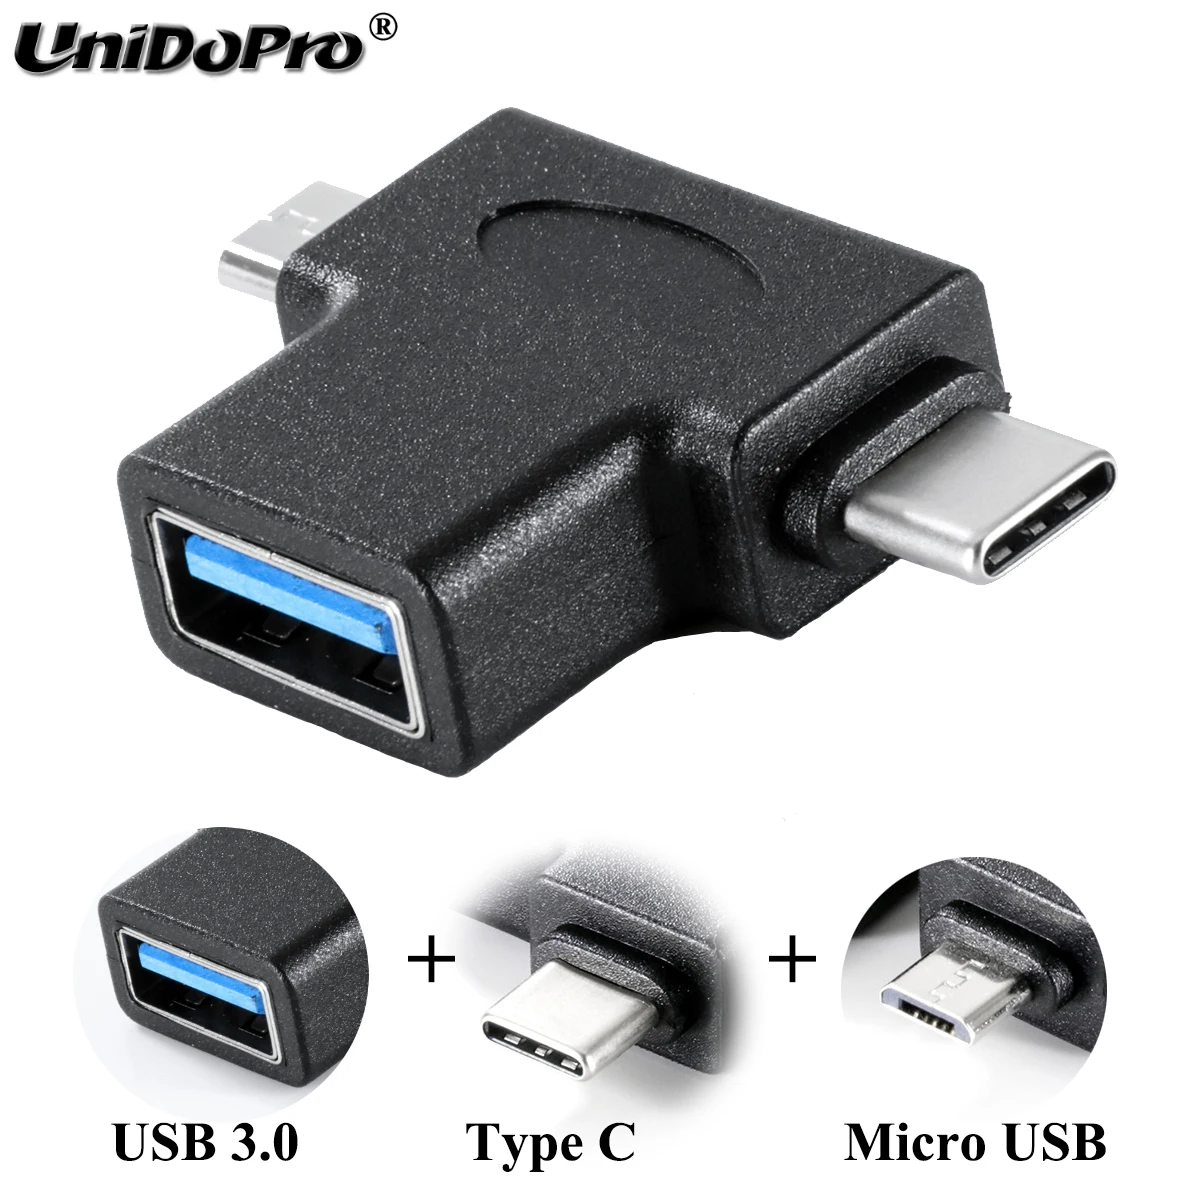 Micro USB OTG Adapter Cable USB OTG Cable Converter Data Cable For Phone FZ 